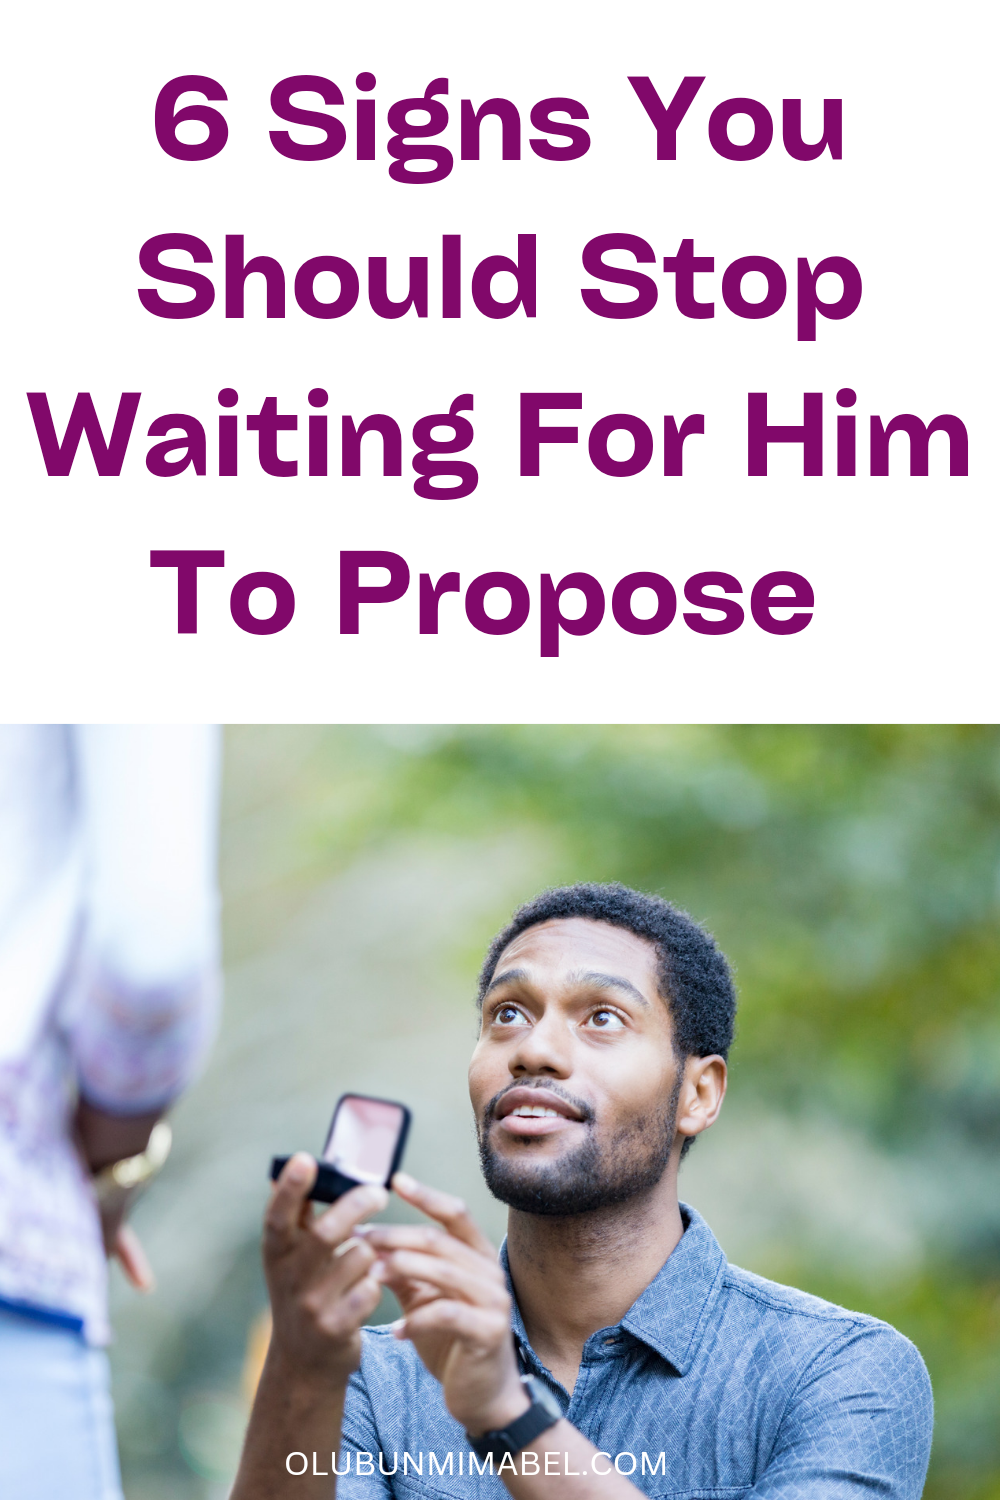 When To Stop Waiting For Him To Propose